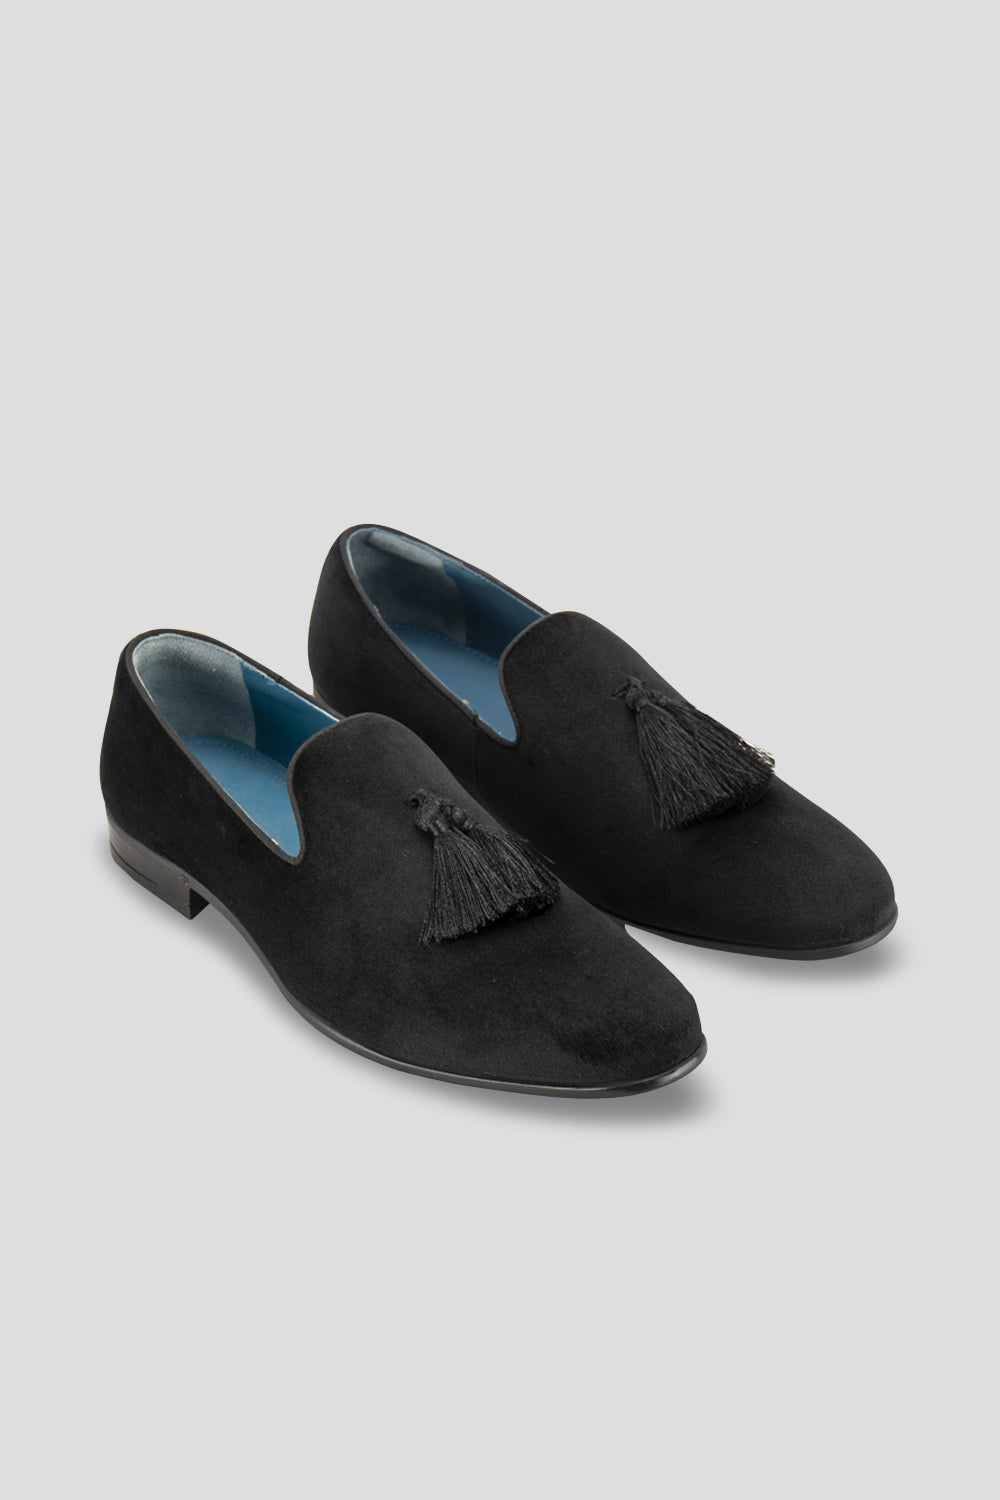 Jabob Mens party loafers with tassel in black